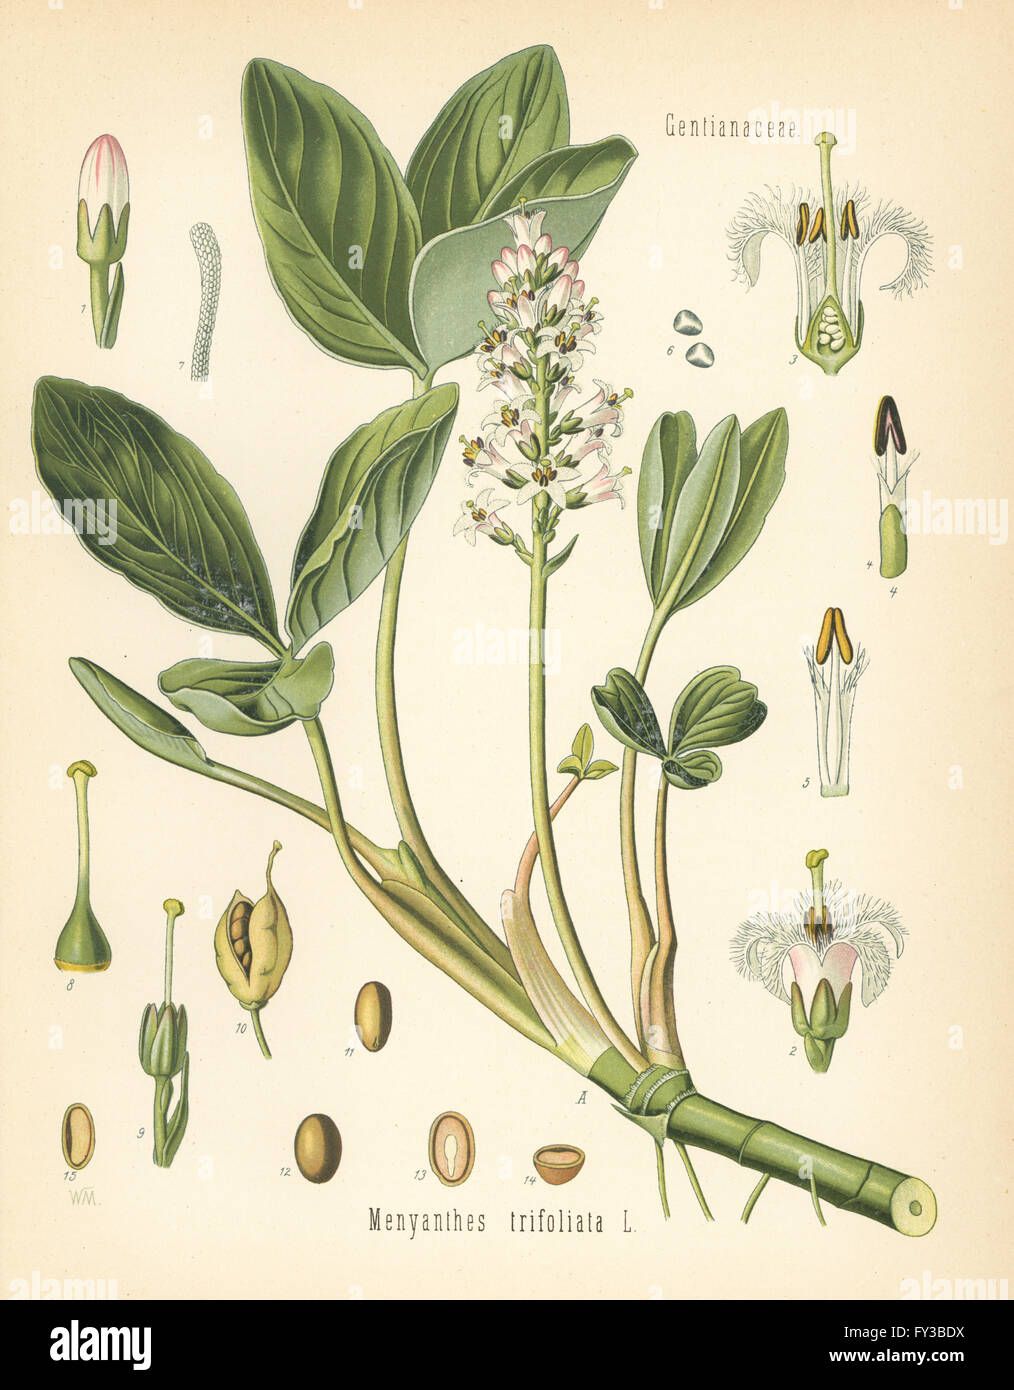 Buckbean, Menyanthes trifoliata. Chromolithograph after a botanical illustration from Hermann Adolph Koehler's Medicinal Plants, edited by Gustav Pabst, Koehler, Germany, 1887. Stock Photo